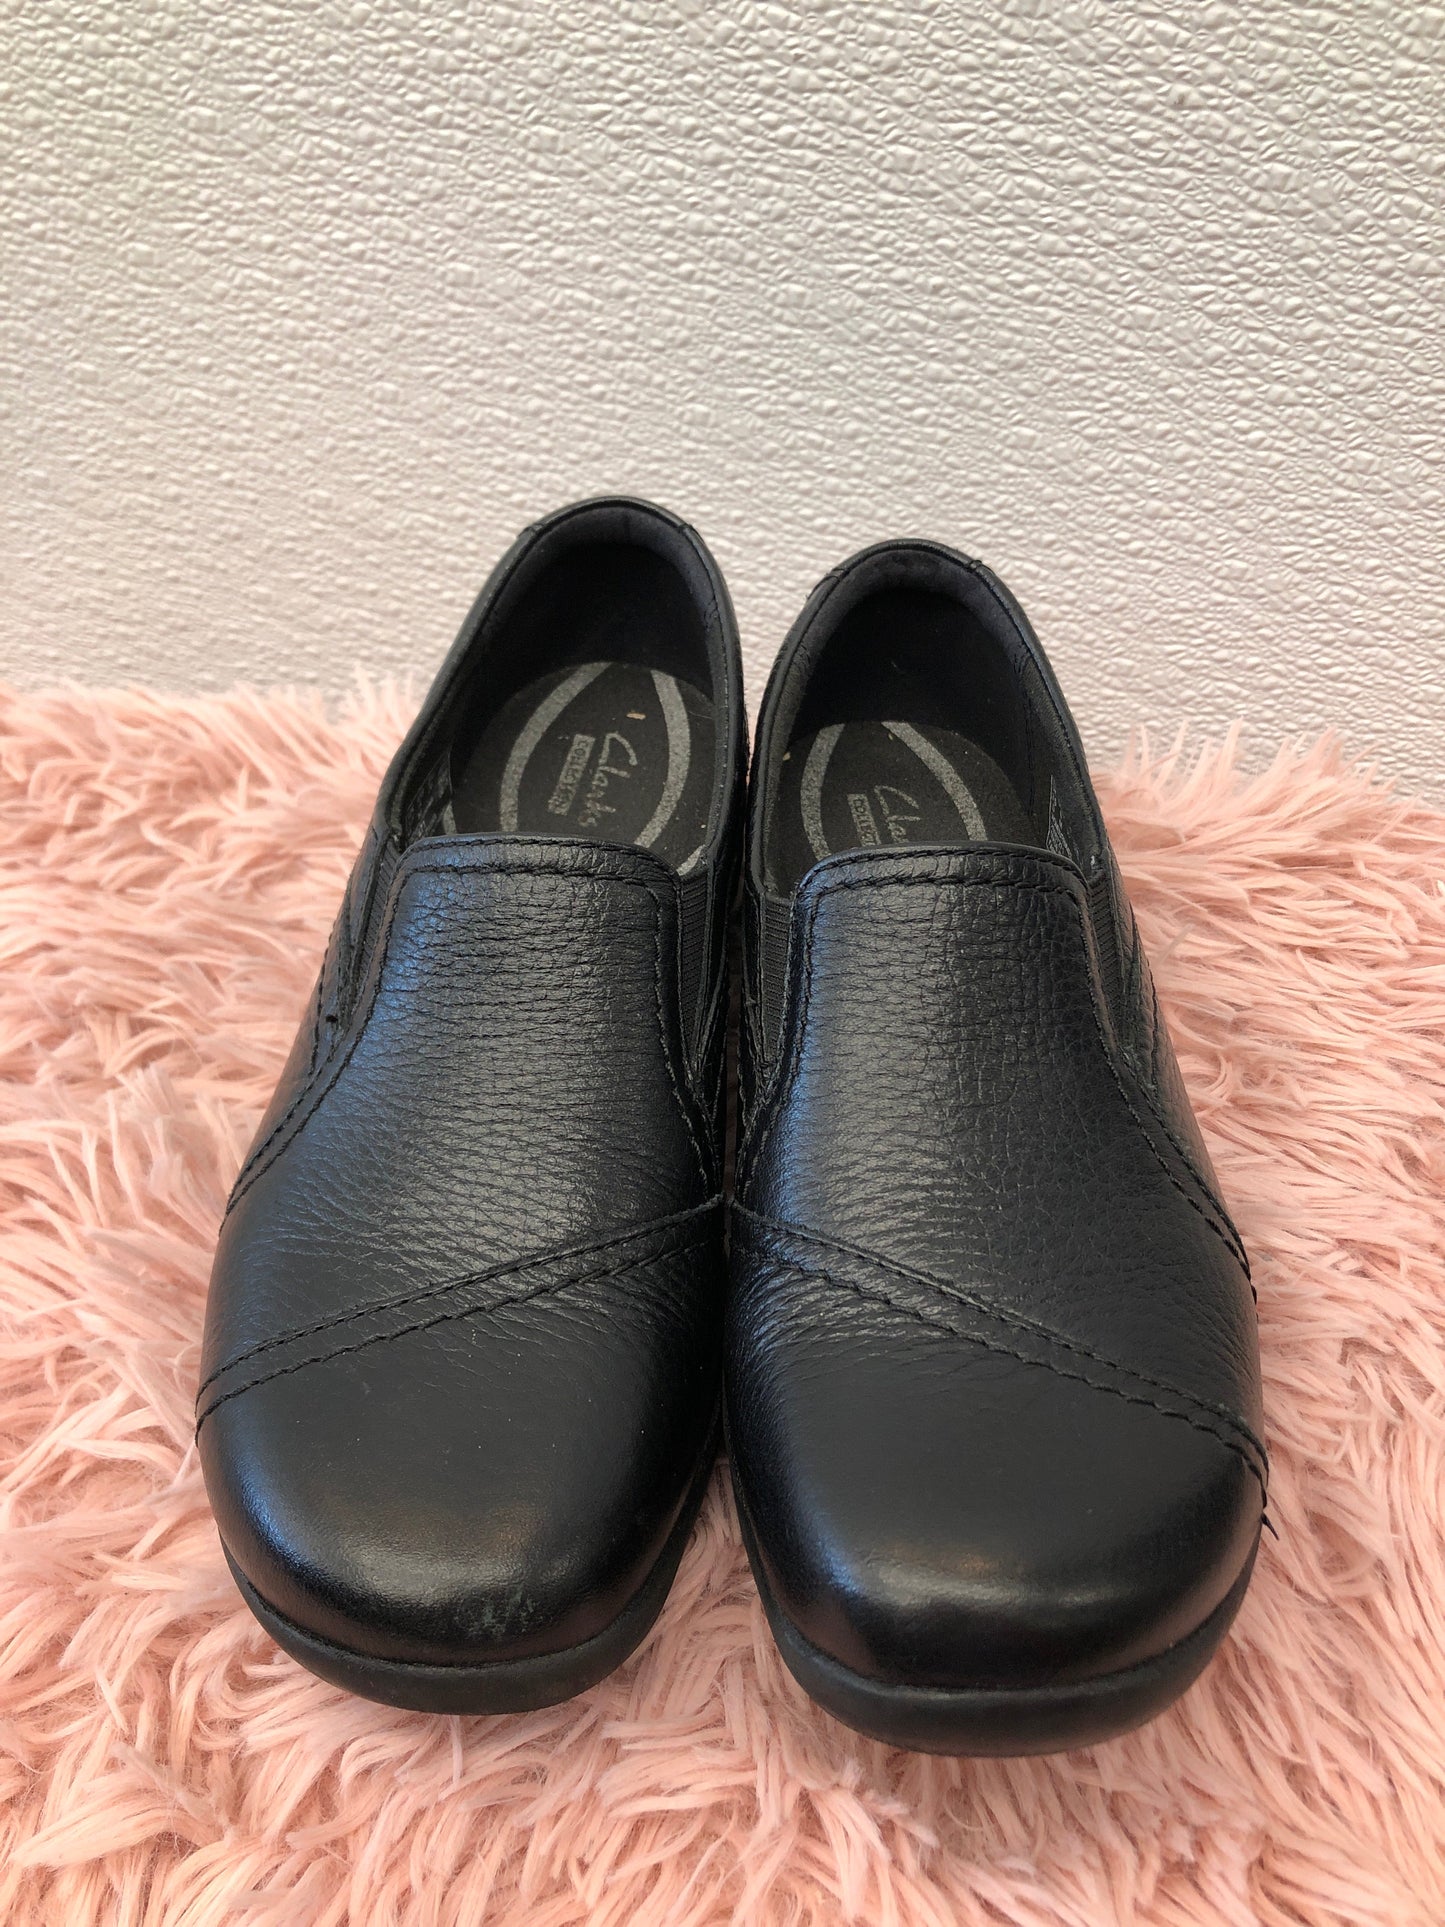 Black Shoes Flats Other Clarks, Size 6